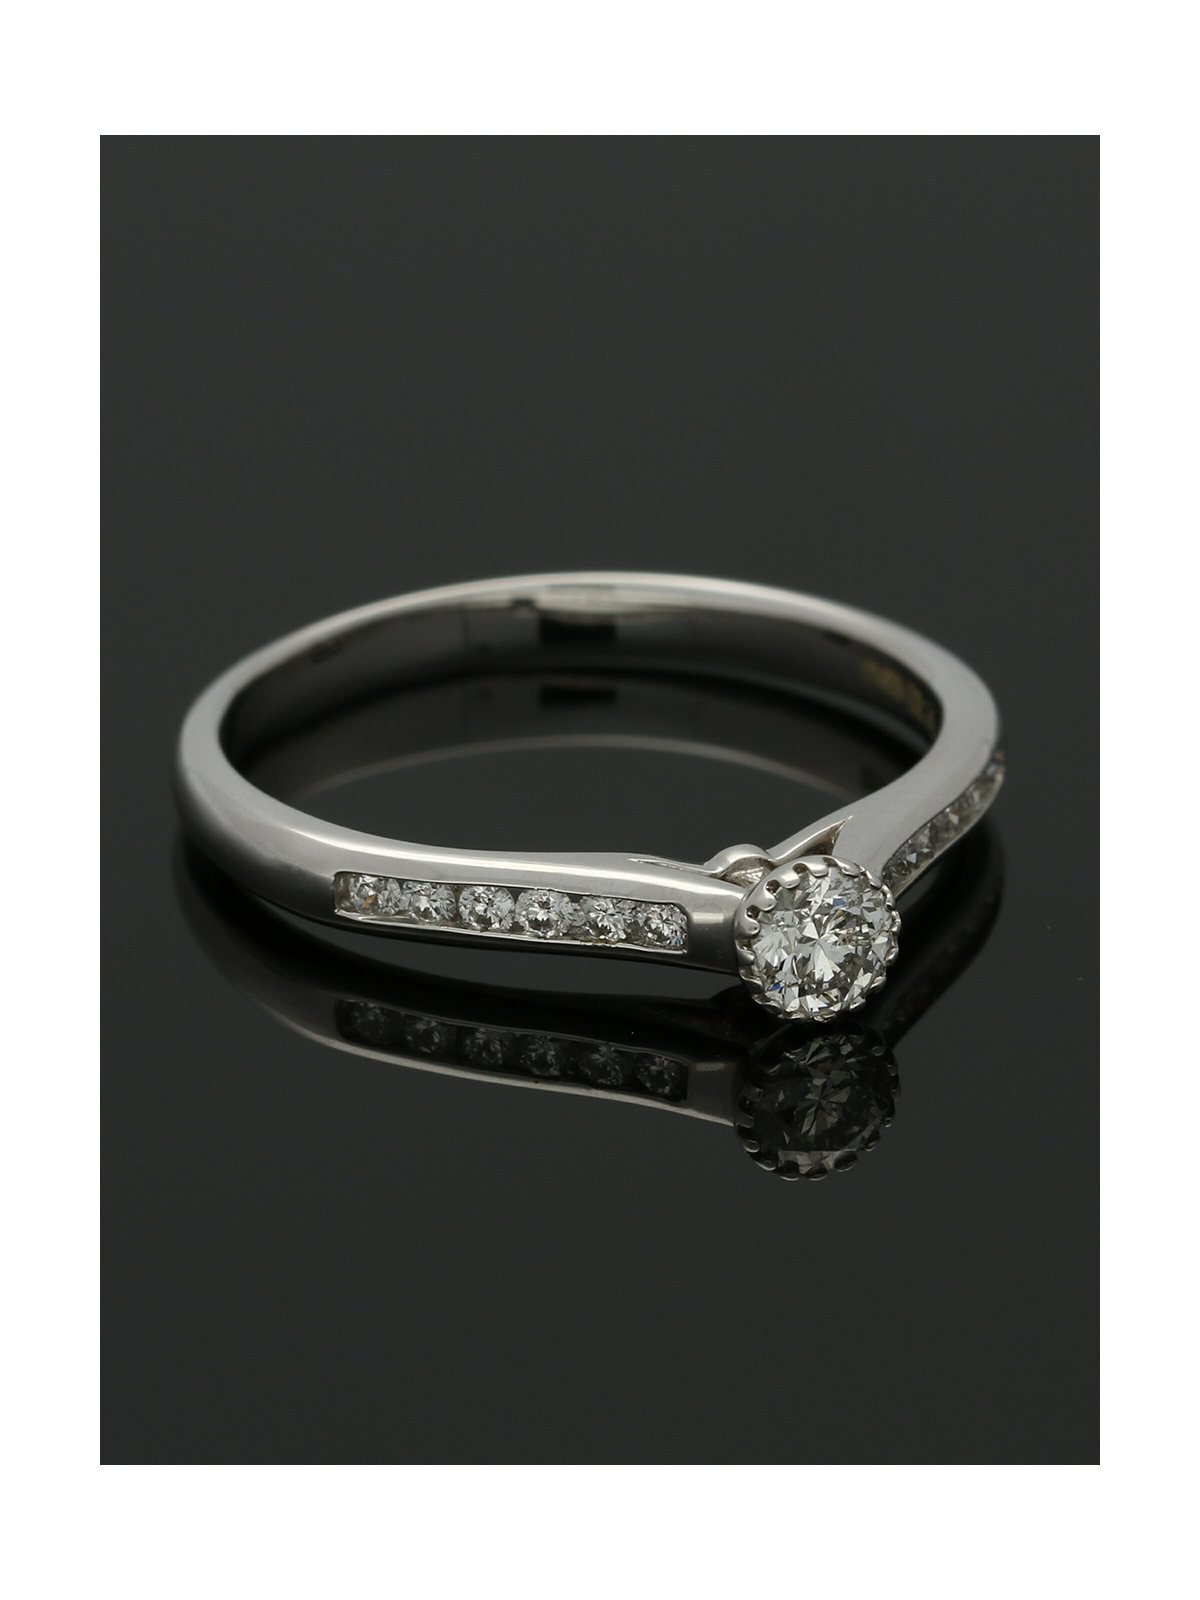 Diamond Solitaire Engagement Ring 0.35ct Round Brilliant Cut in 9ct White Gold with Diamond Shoulders